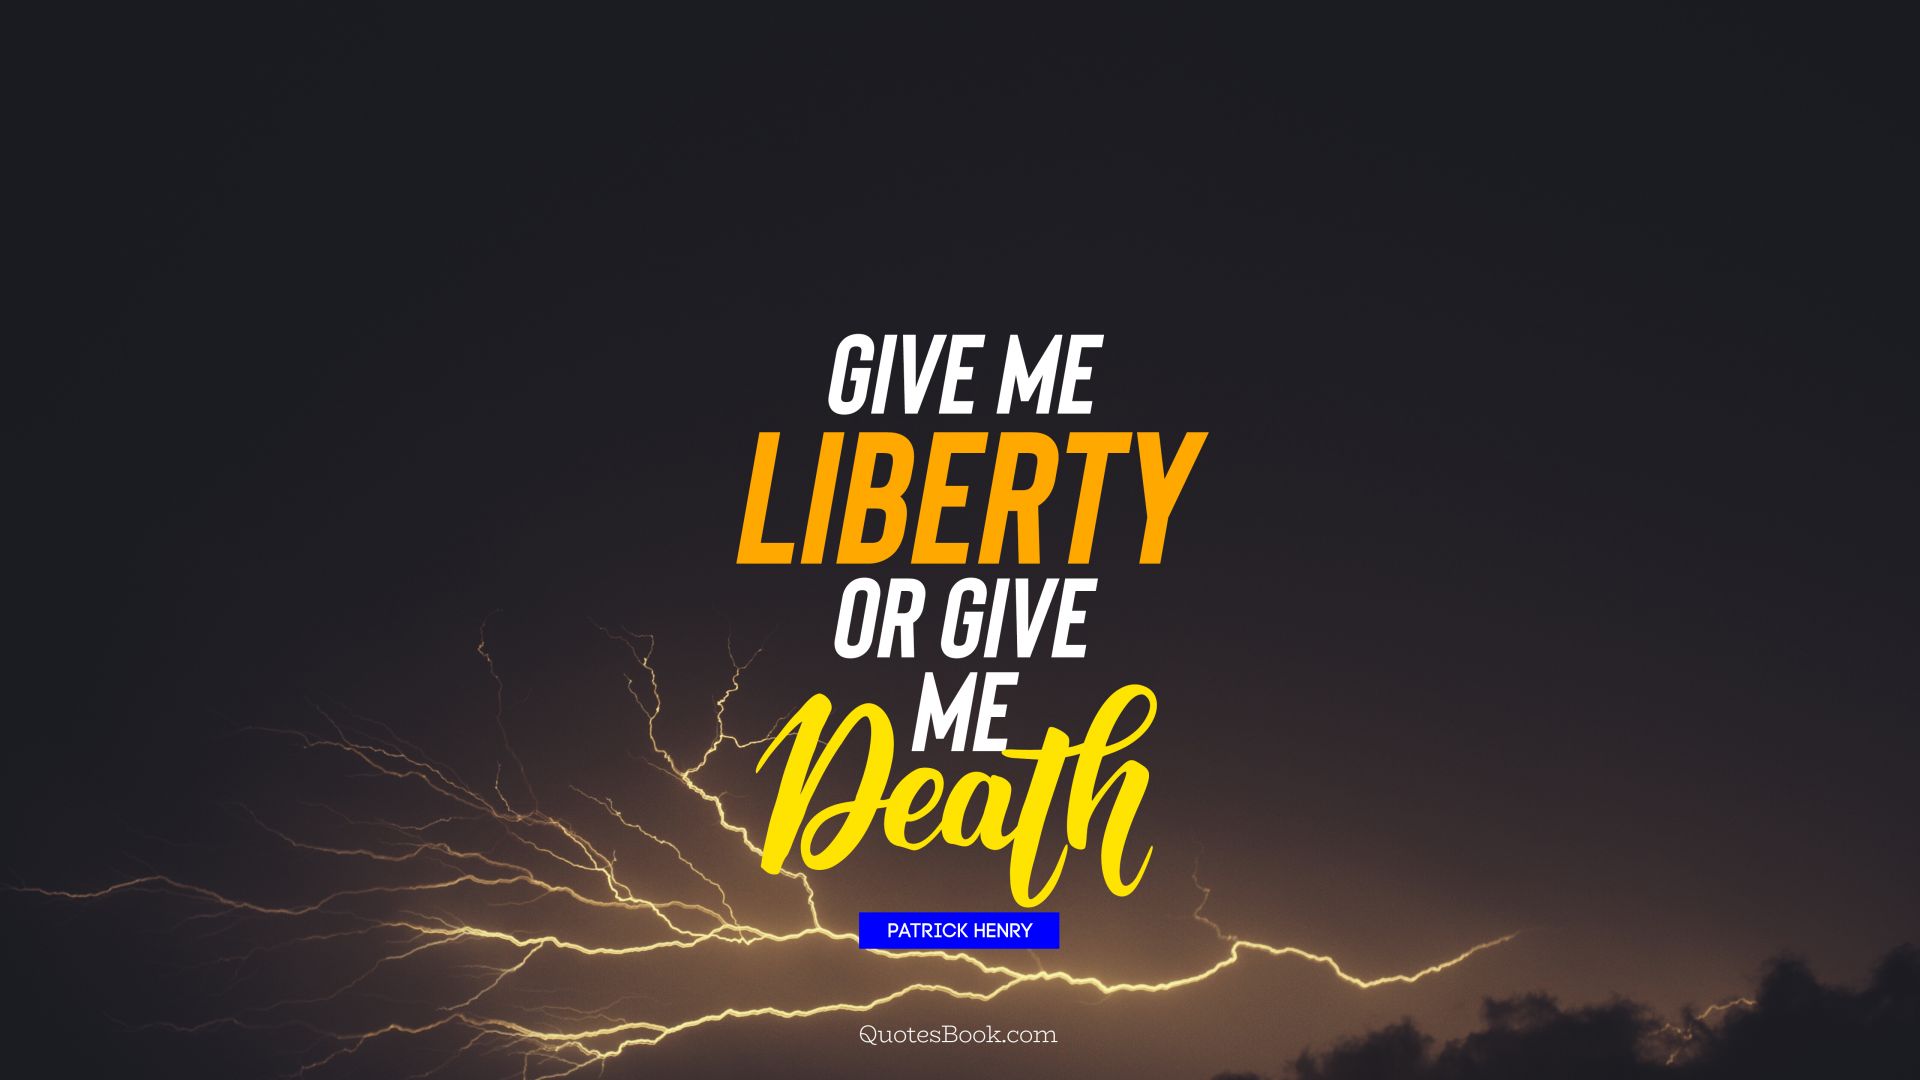 Give me liberty or give me death. - Quote by Patrick Henry